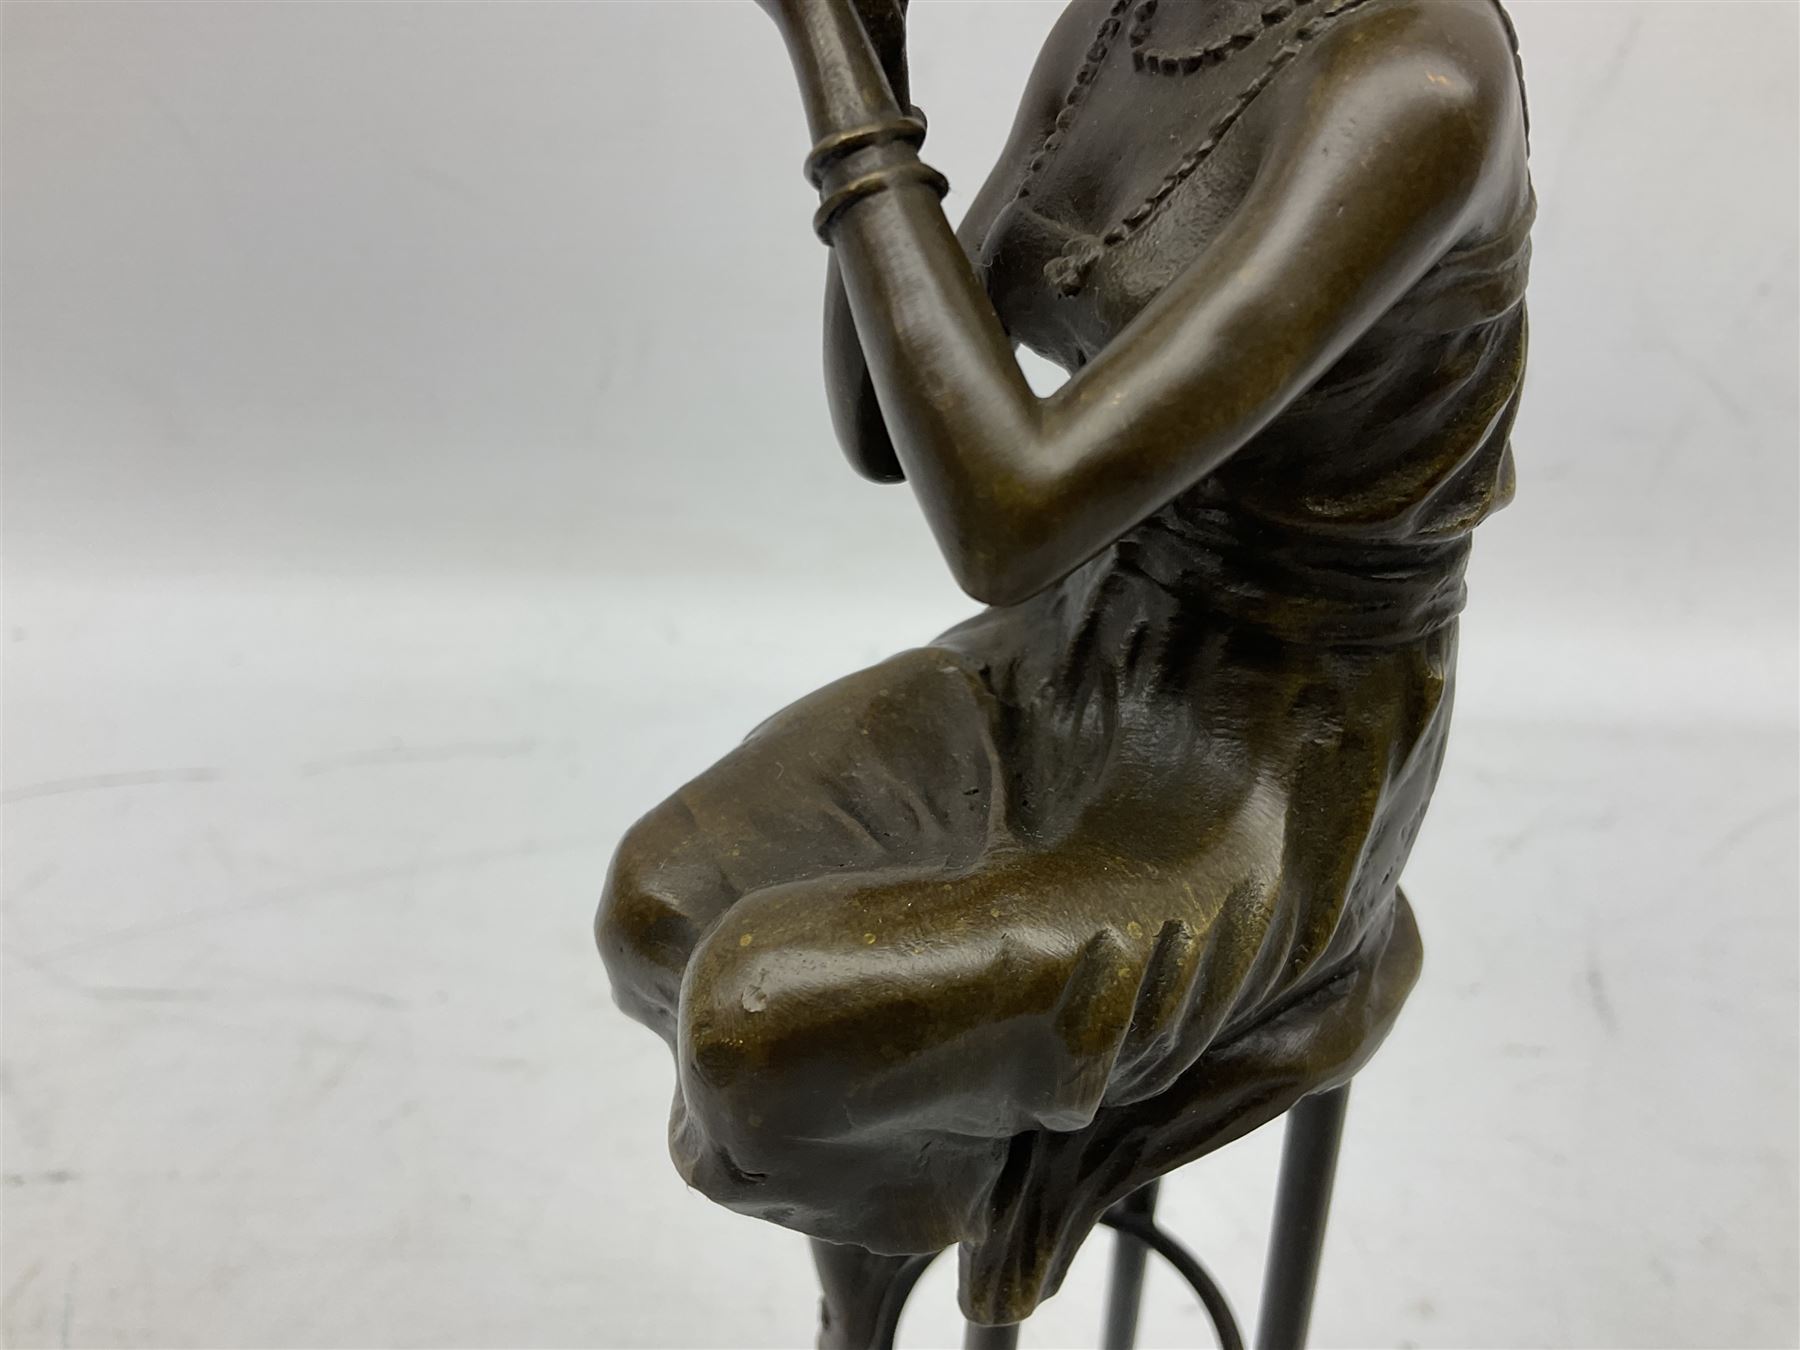 Art Deco style bronze modelled as a female figure with mirror in hand - Image 9 of 11